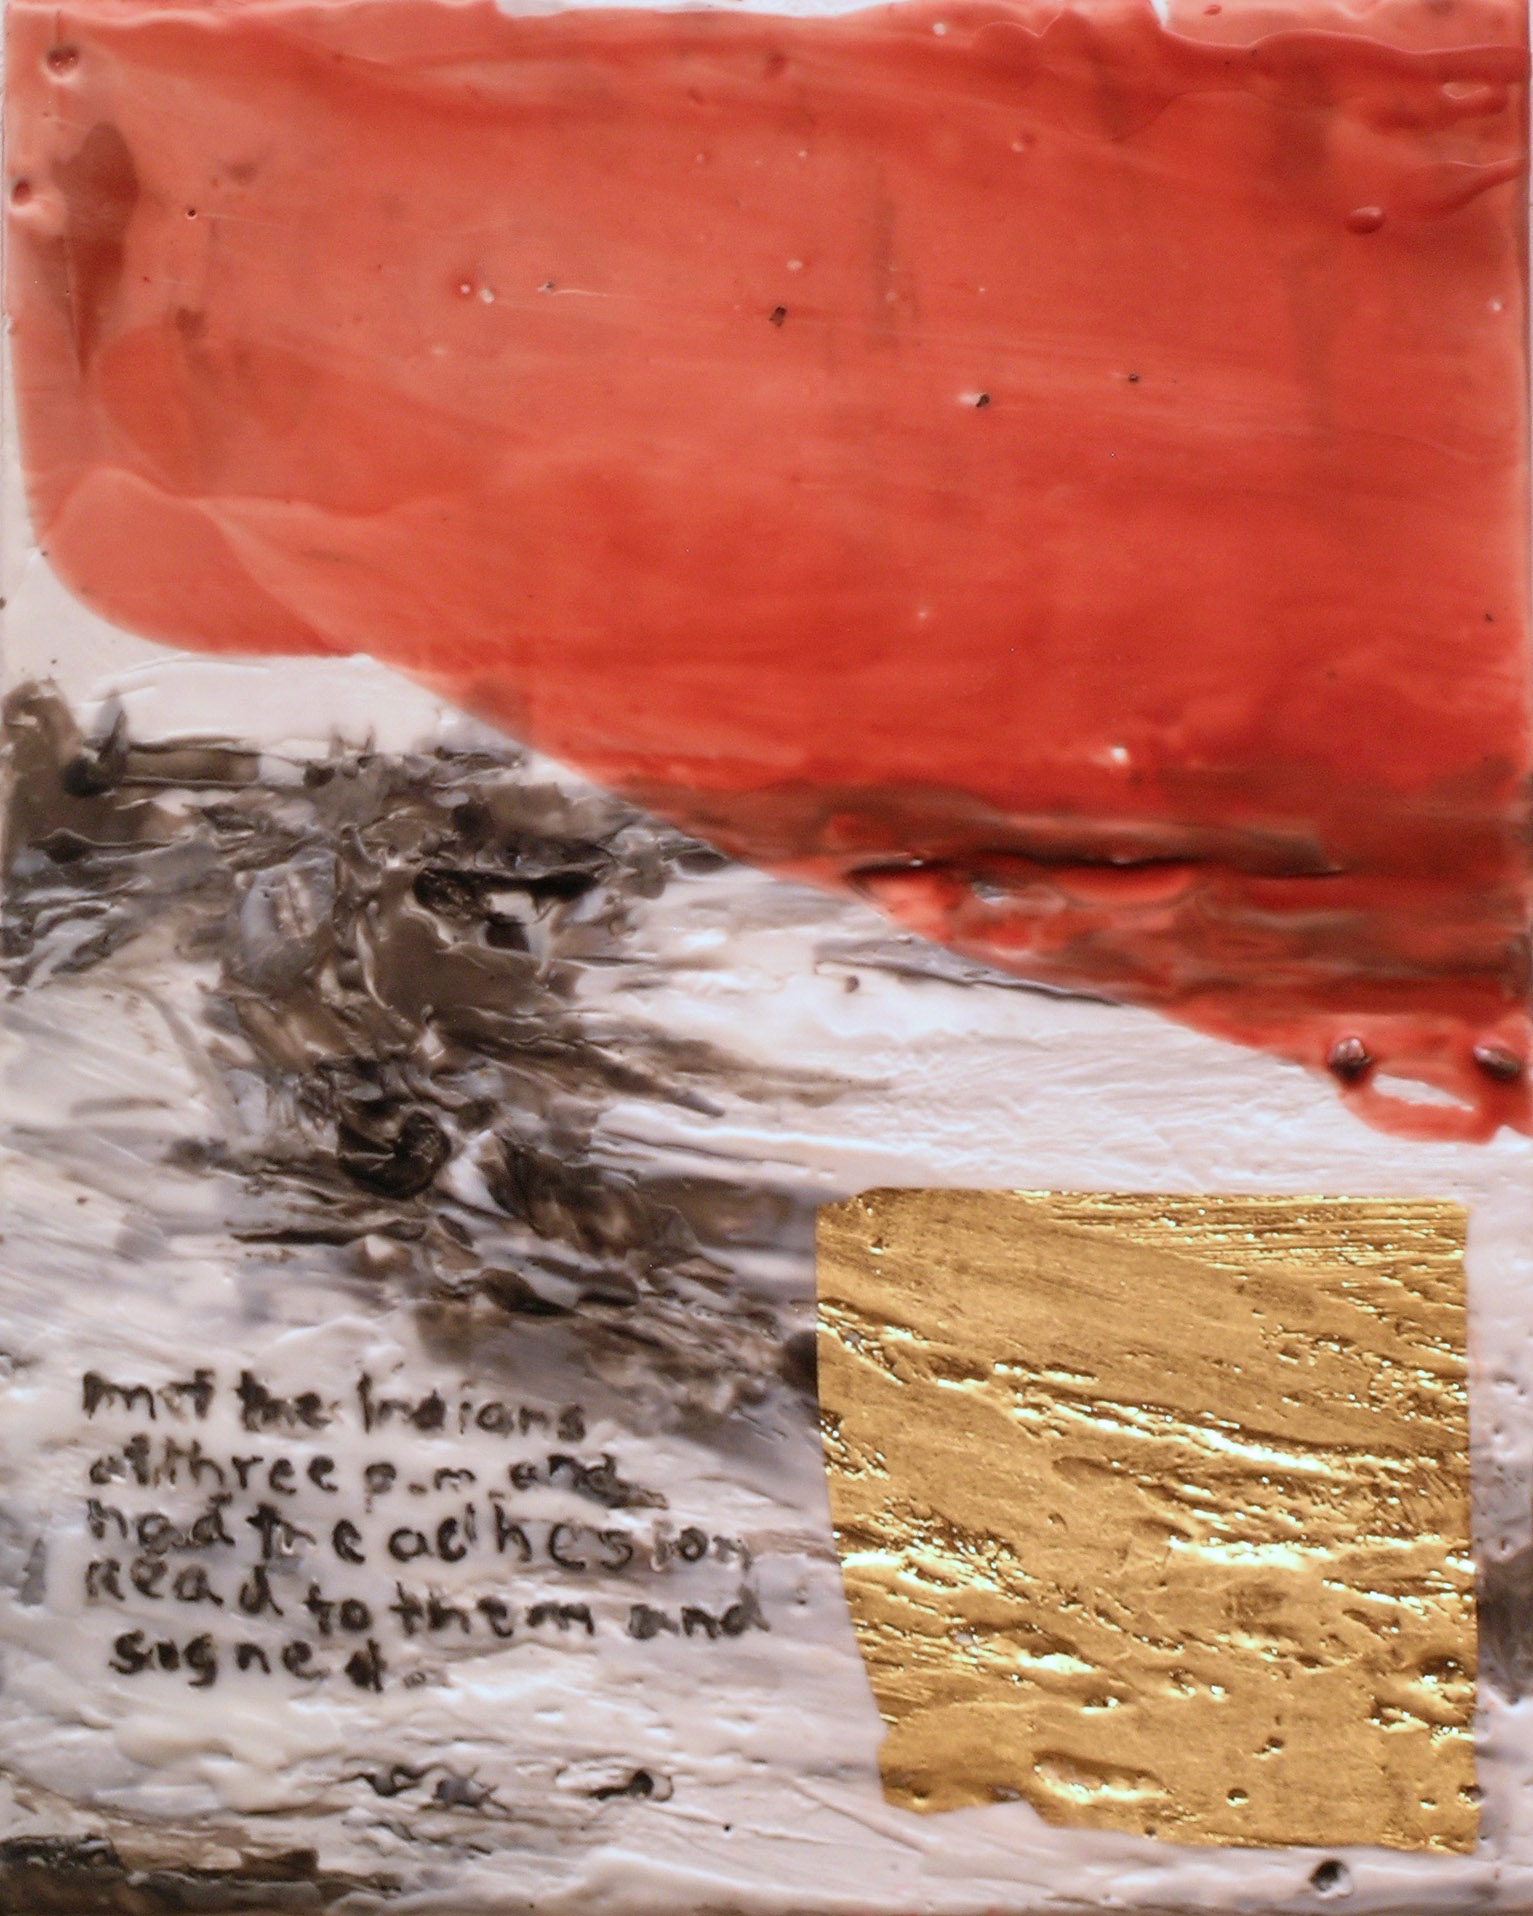 TS-070 Met the Indians at three P.M. and had the adhesion read to them and signed, 2016, mixed media, encaustic, 10x8.jpg